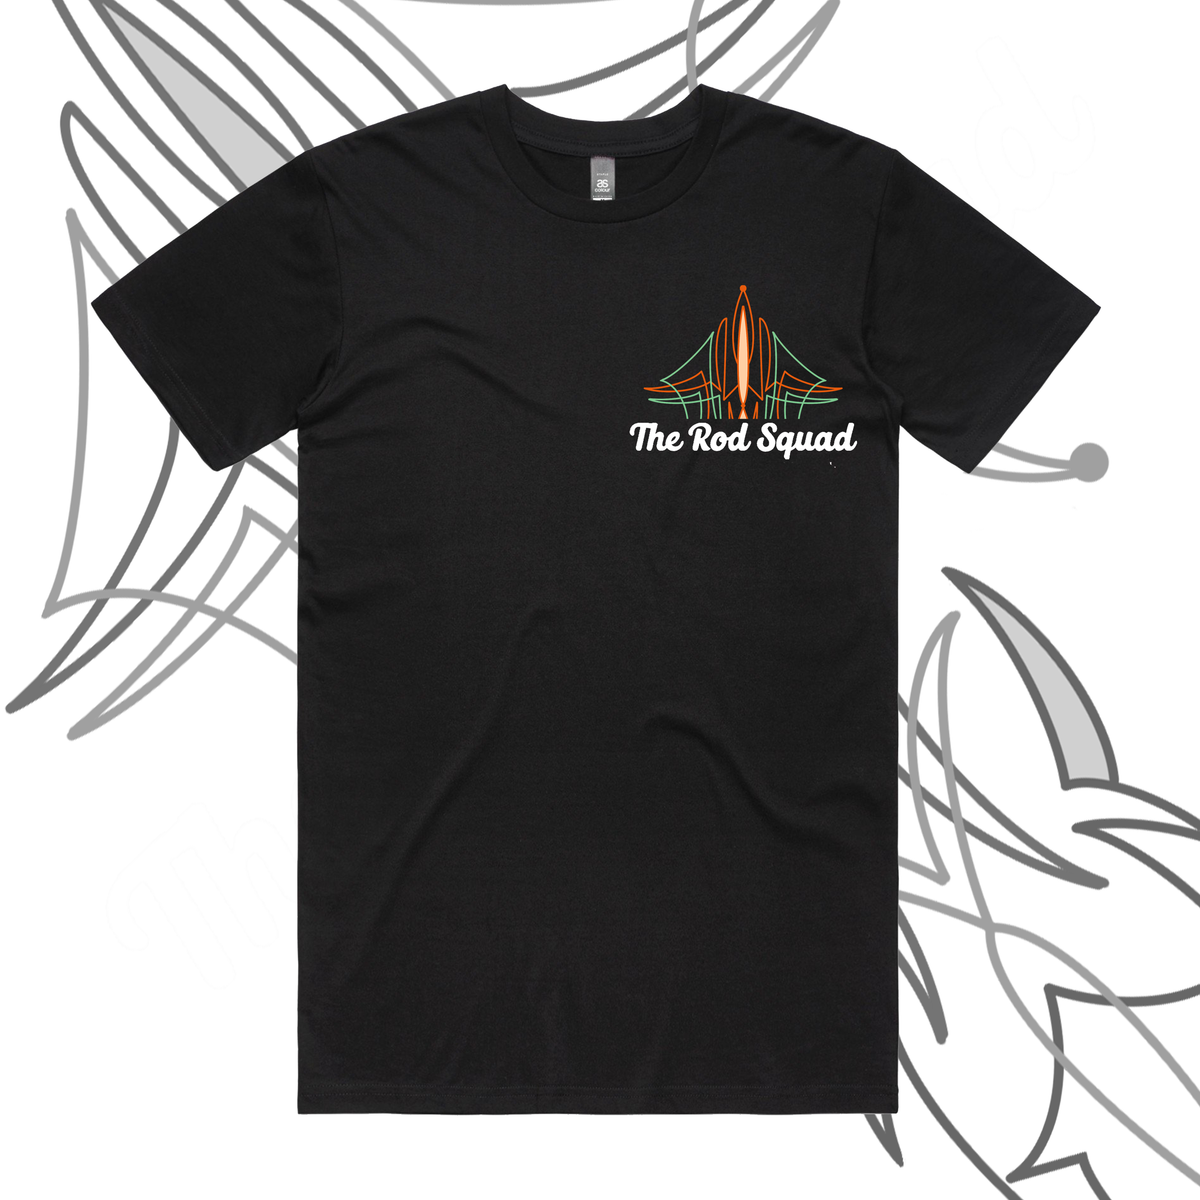 The Pinstripe T-Shirt For Everything Old School – The Rod Squad